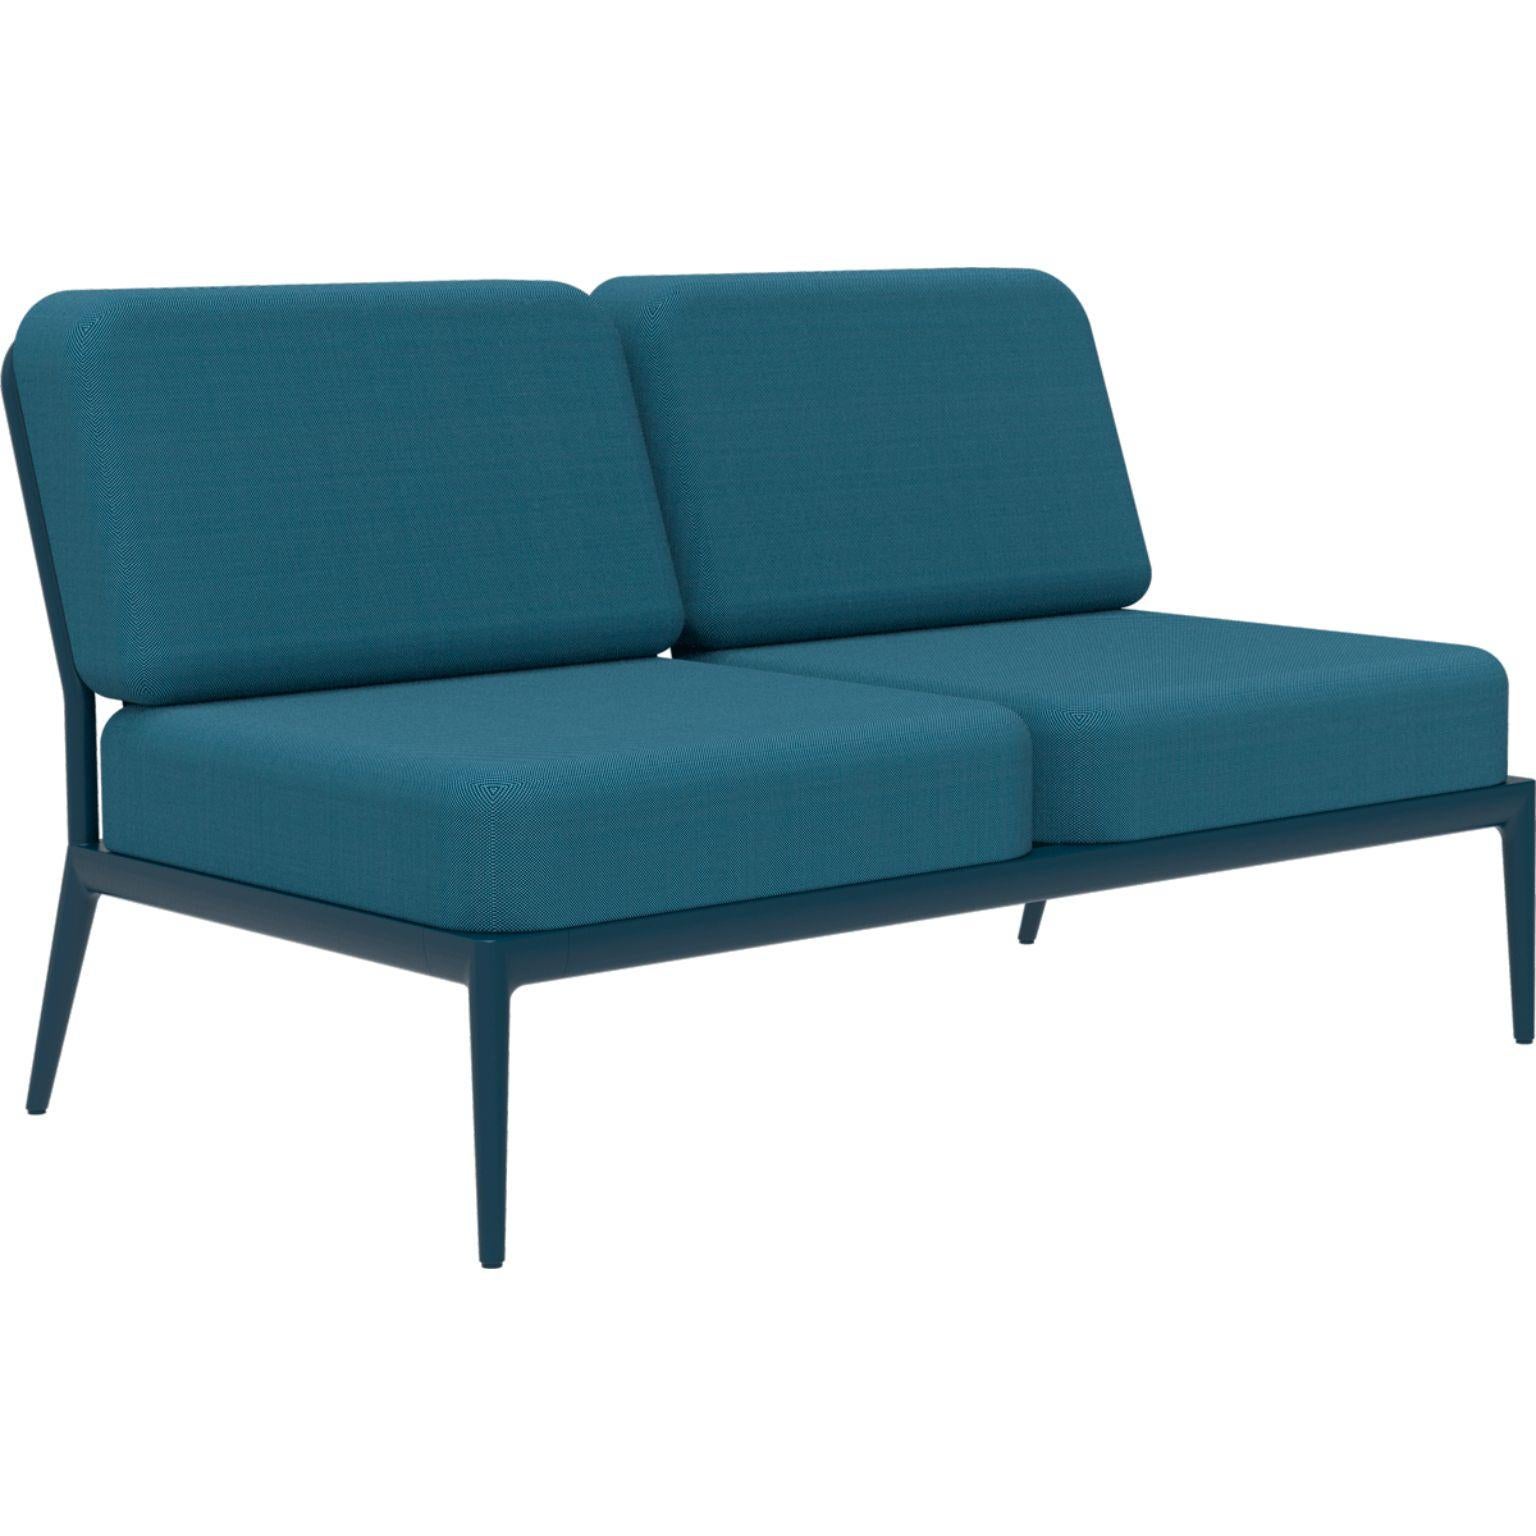 Ribbons Navy Double central modular sofa by MOWEE
Dimensions: D83 x W136 x H81 cm
Material: Aluminium, and upholstery.
Weight: 27 kg.
Also available in different colors and finishes.

An unmistakable collection for its beauty and robustness. A